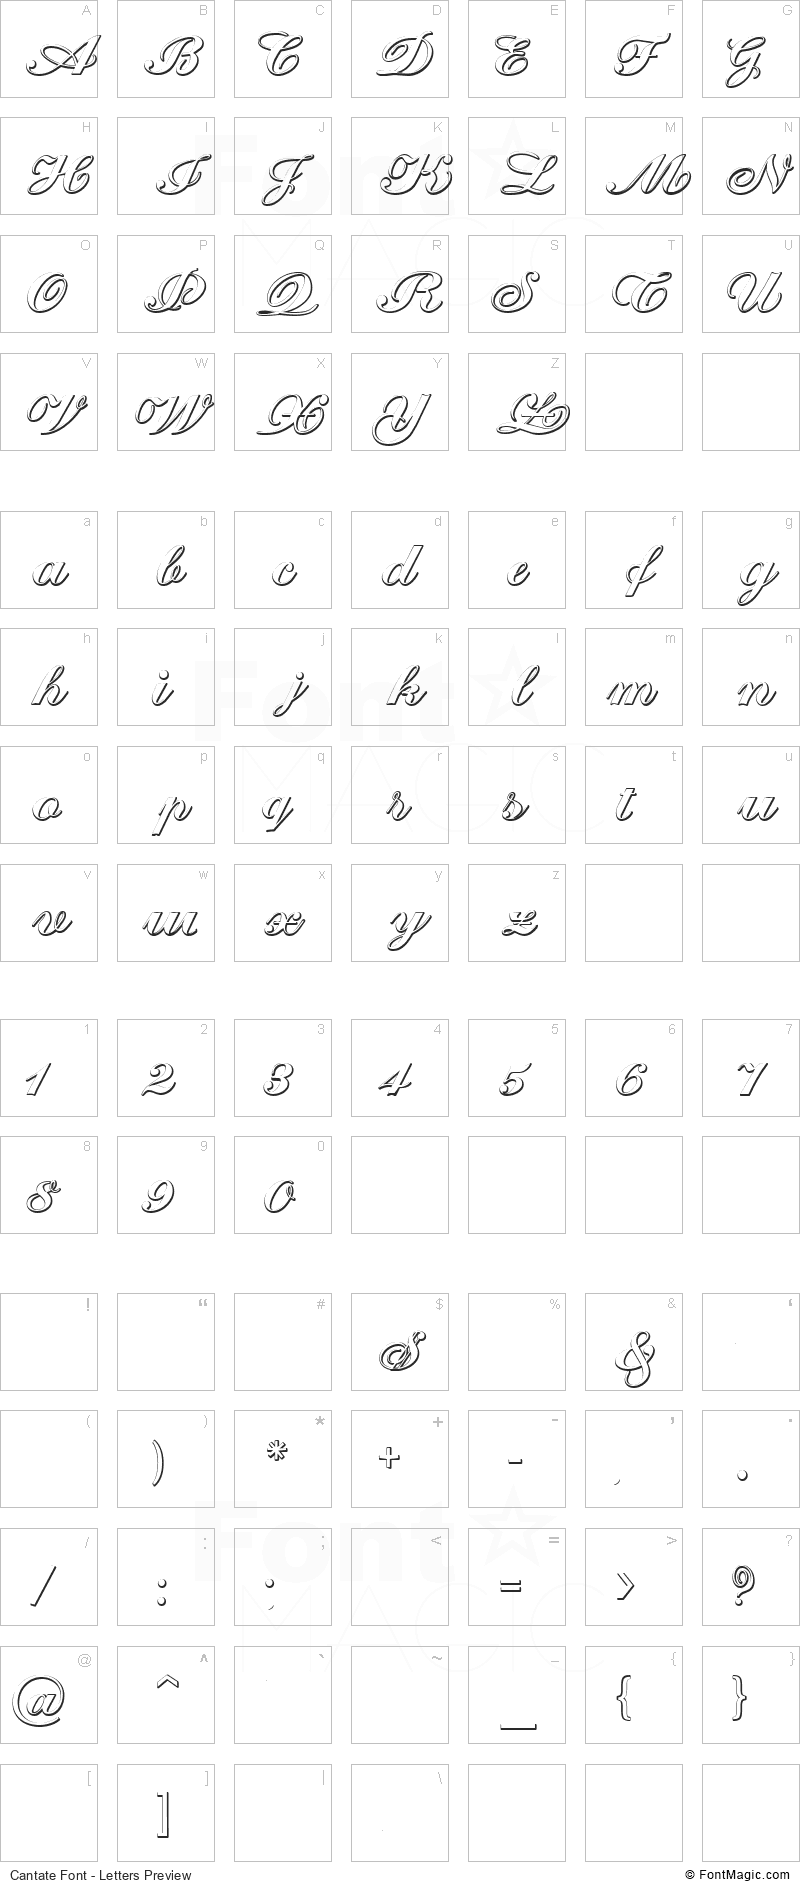 Cantate Font - All Latters Preview Chart